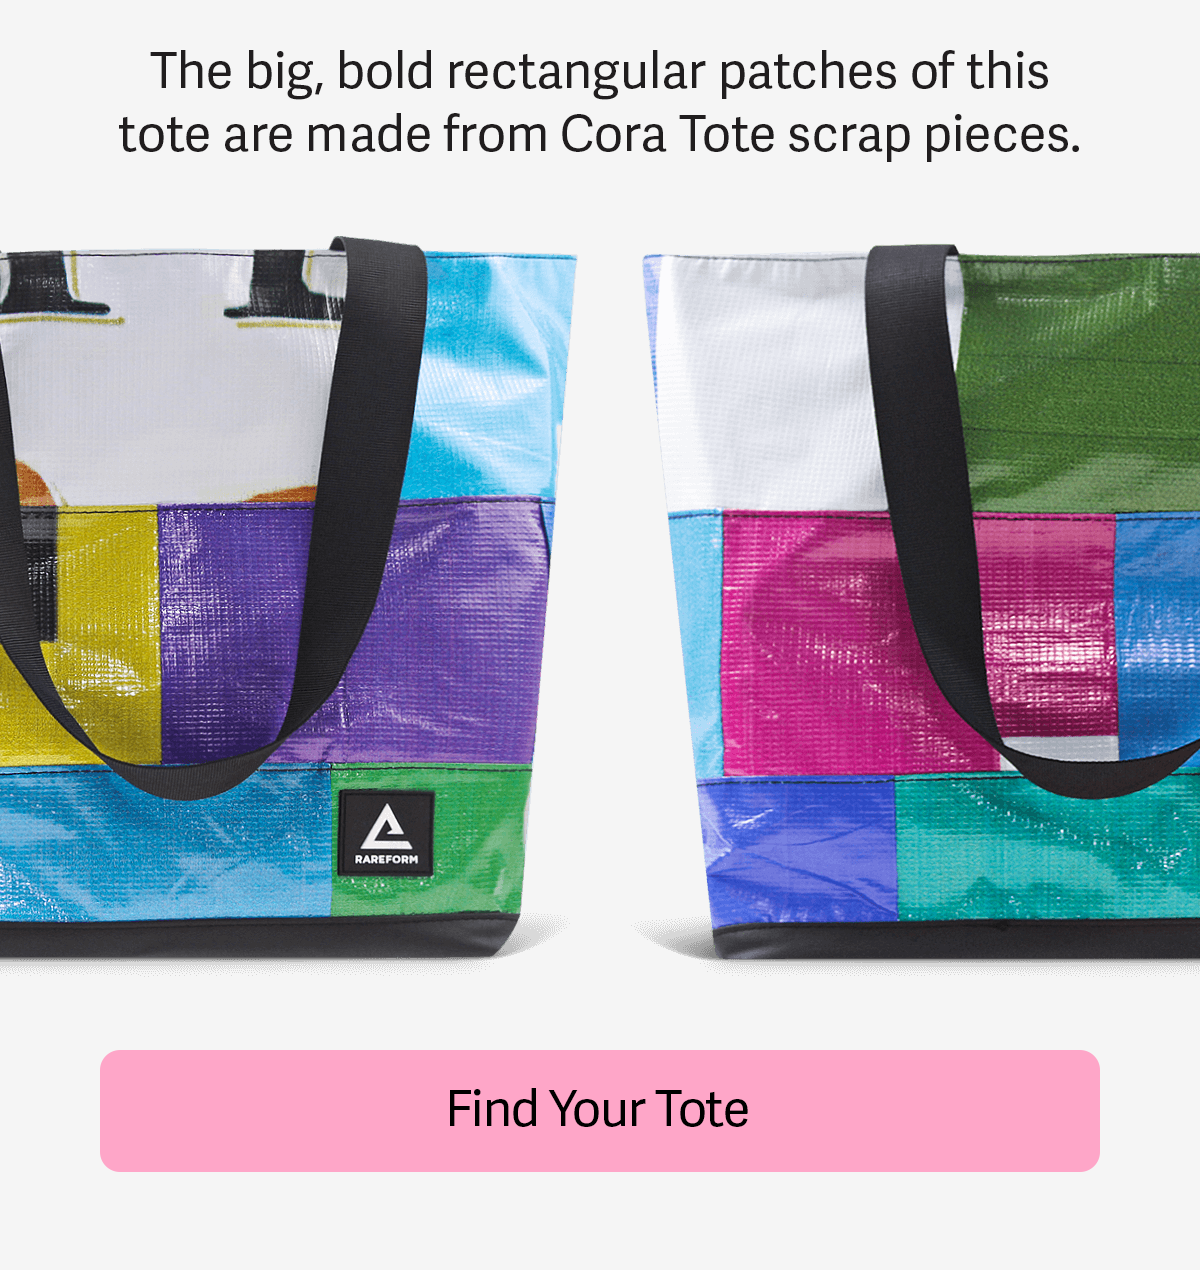 Find your tote